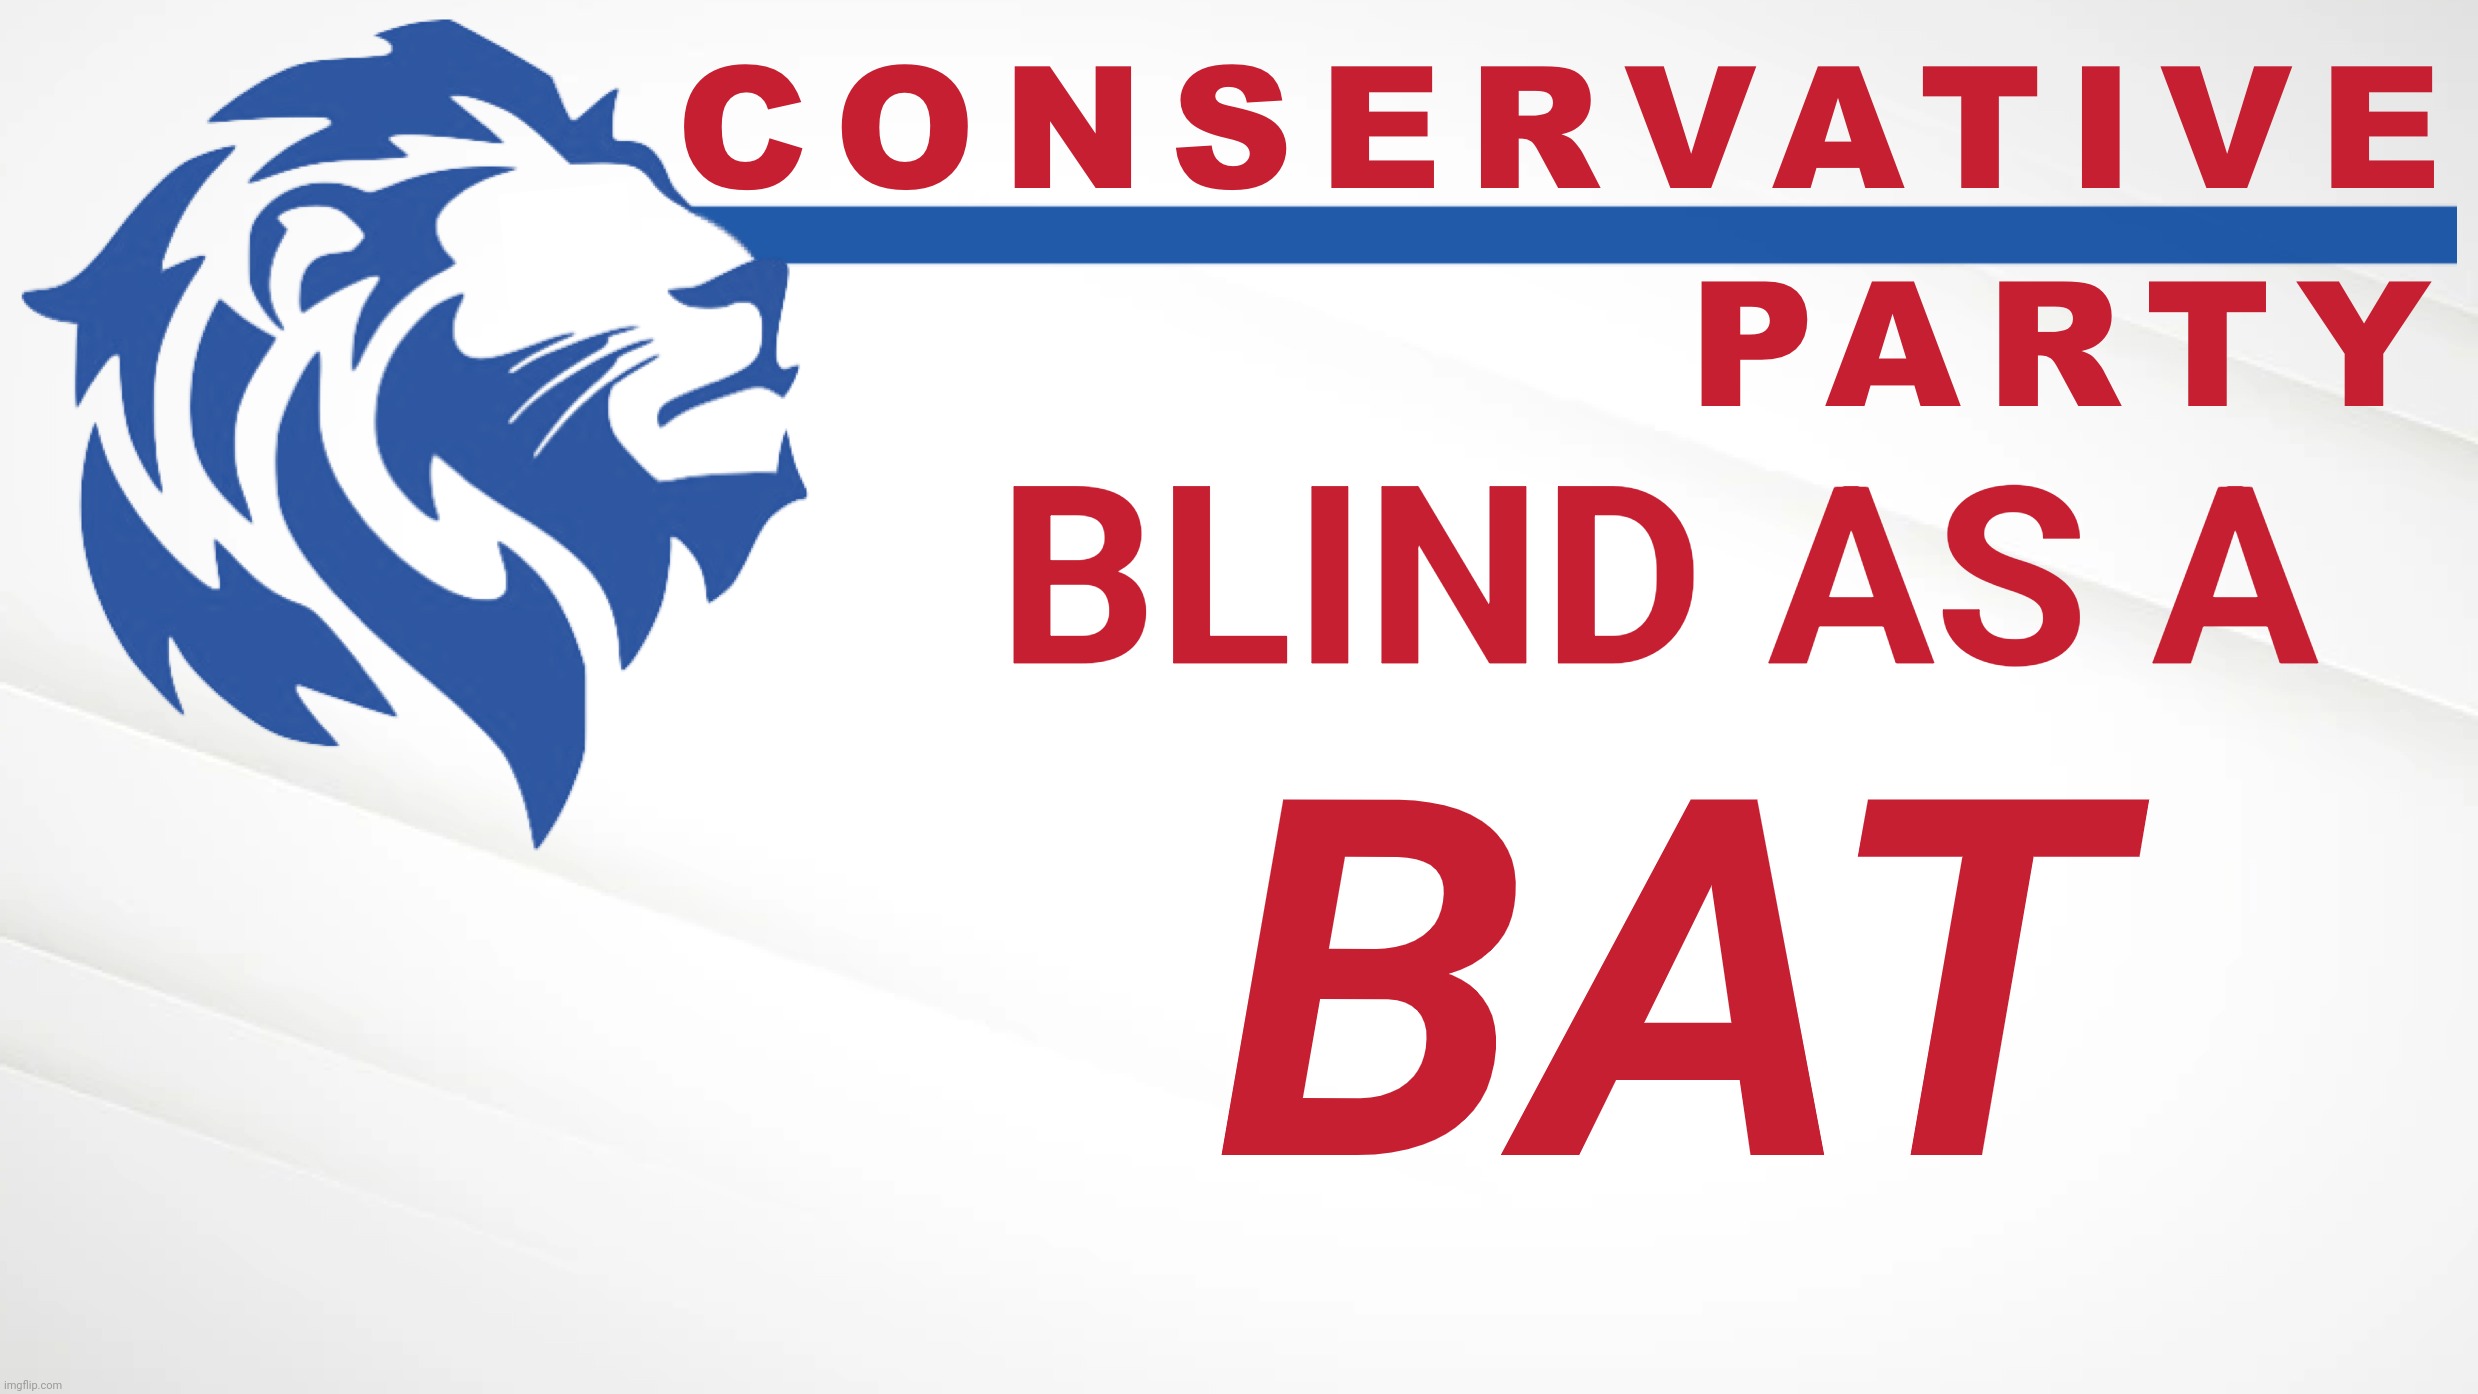 Too much beating Monke | BLIND AS A BAT | image tagged in conservative party of imgflip,conservative party of imgflip is blind,monkee,common sense party | made w/ Imgflip meme maker